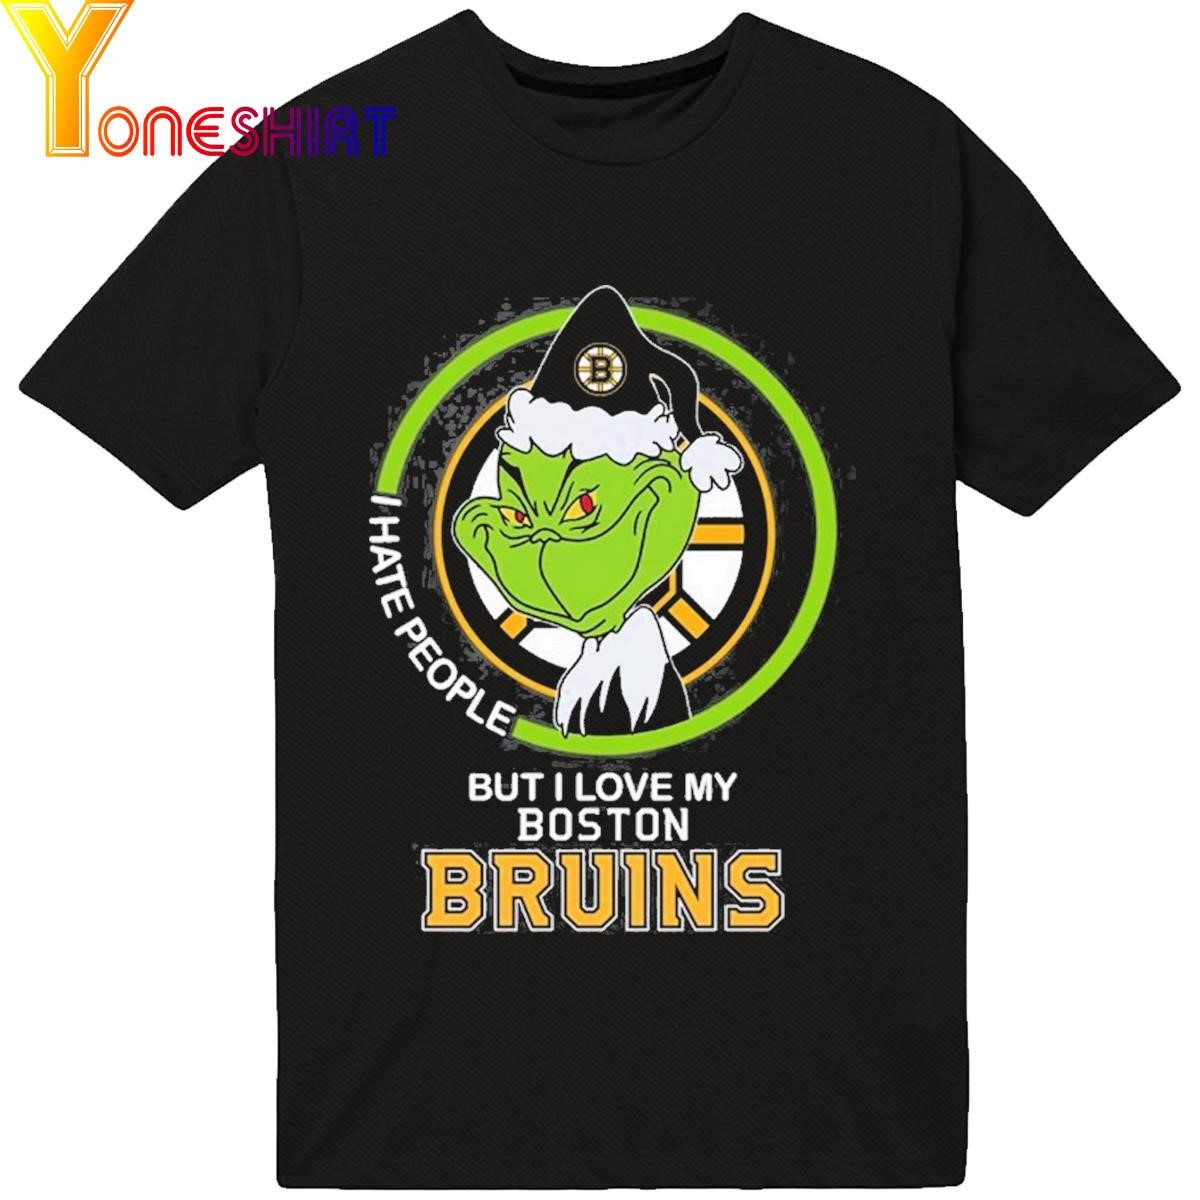 Grinch I Hate People But I Love My Boston Bruins Shirt